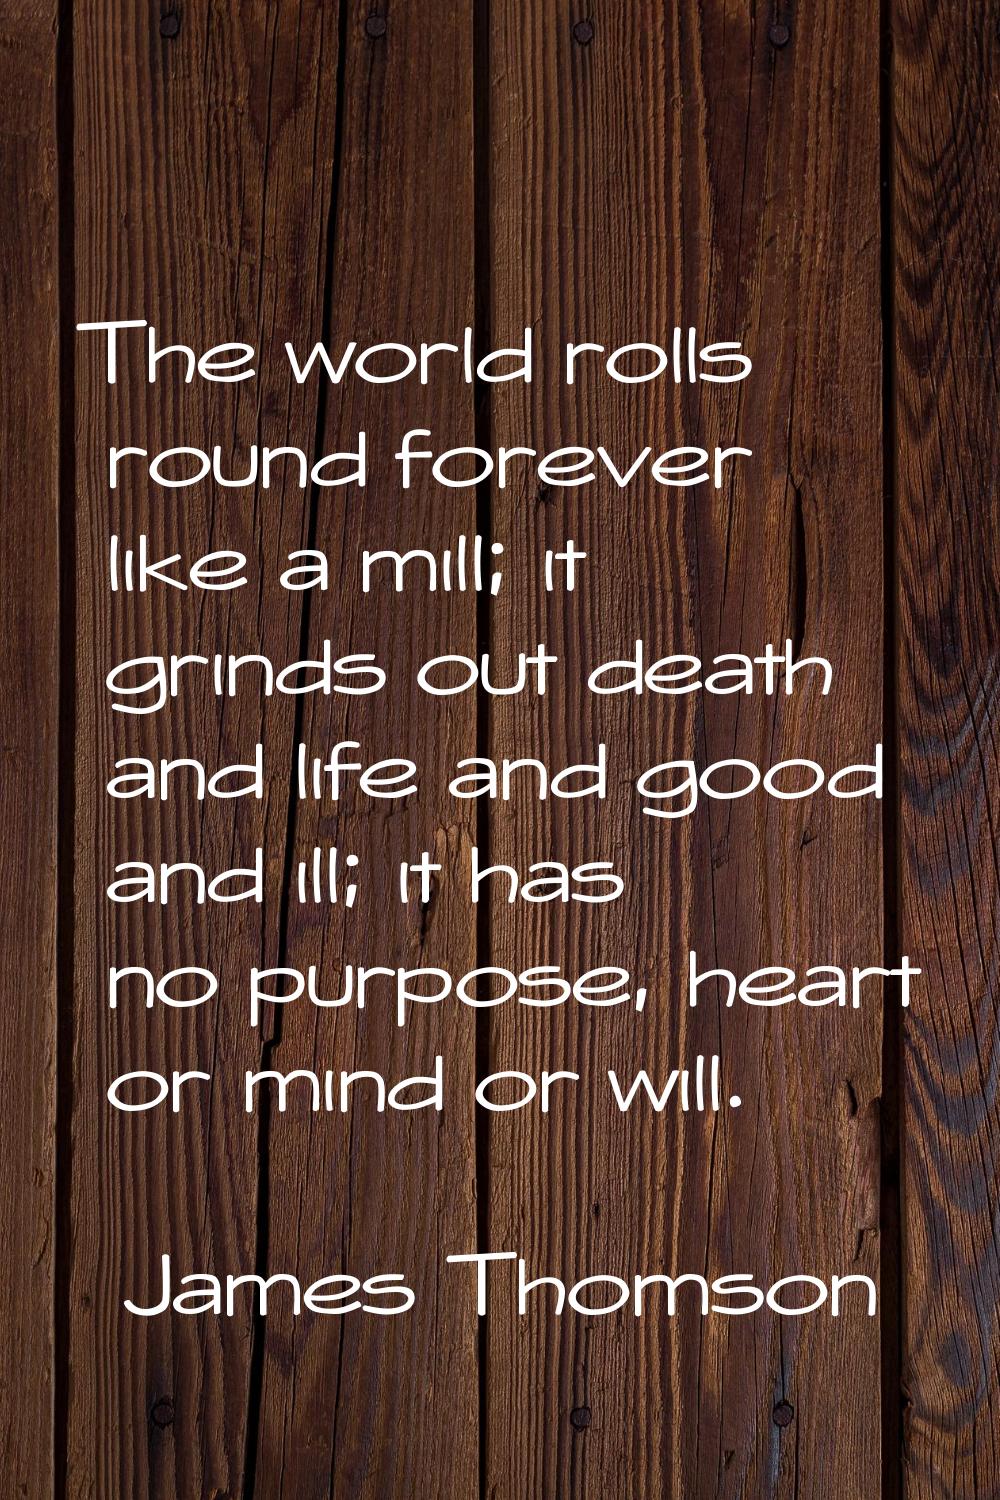 The world rolls round forever like a mill; it grinds out death and life and good and ill; it has no